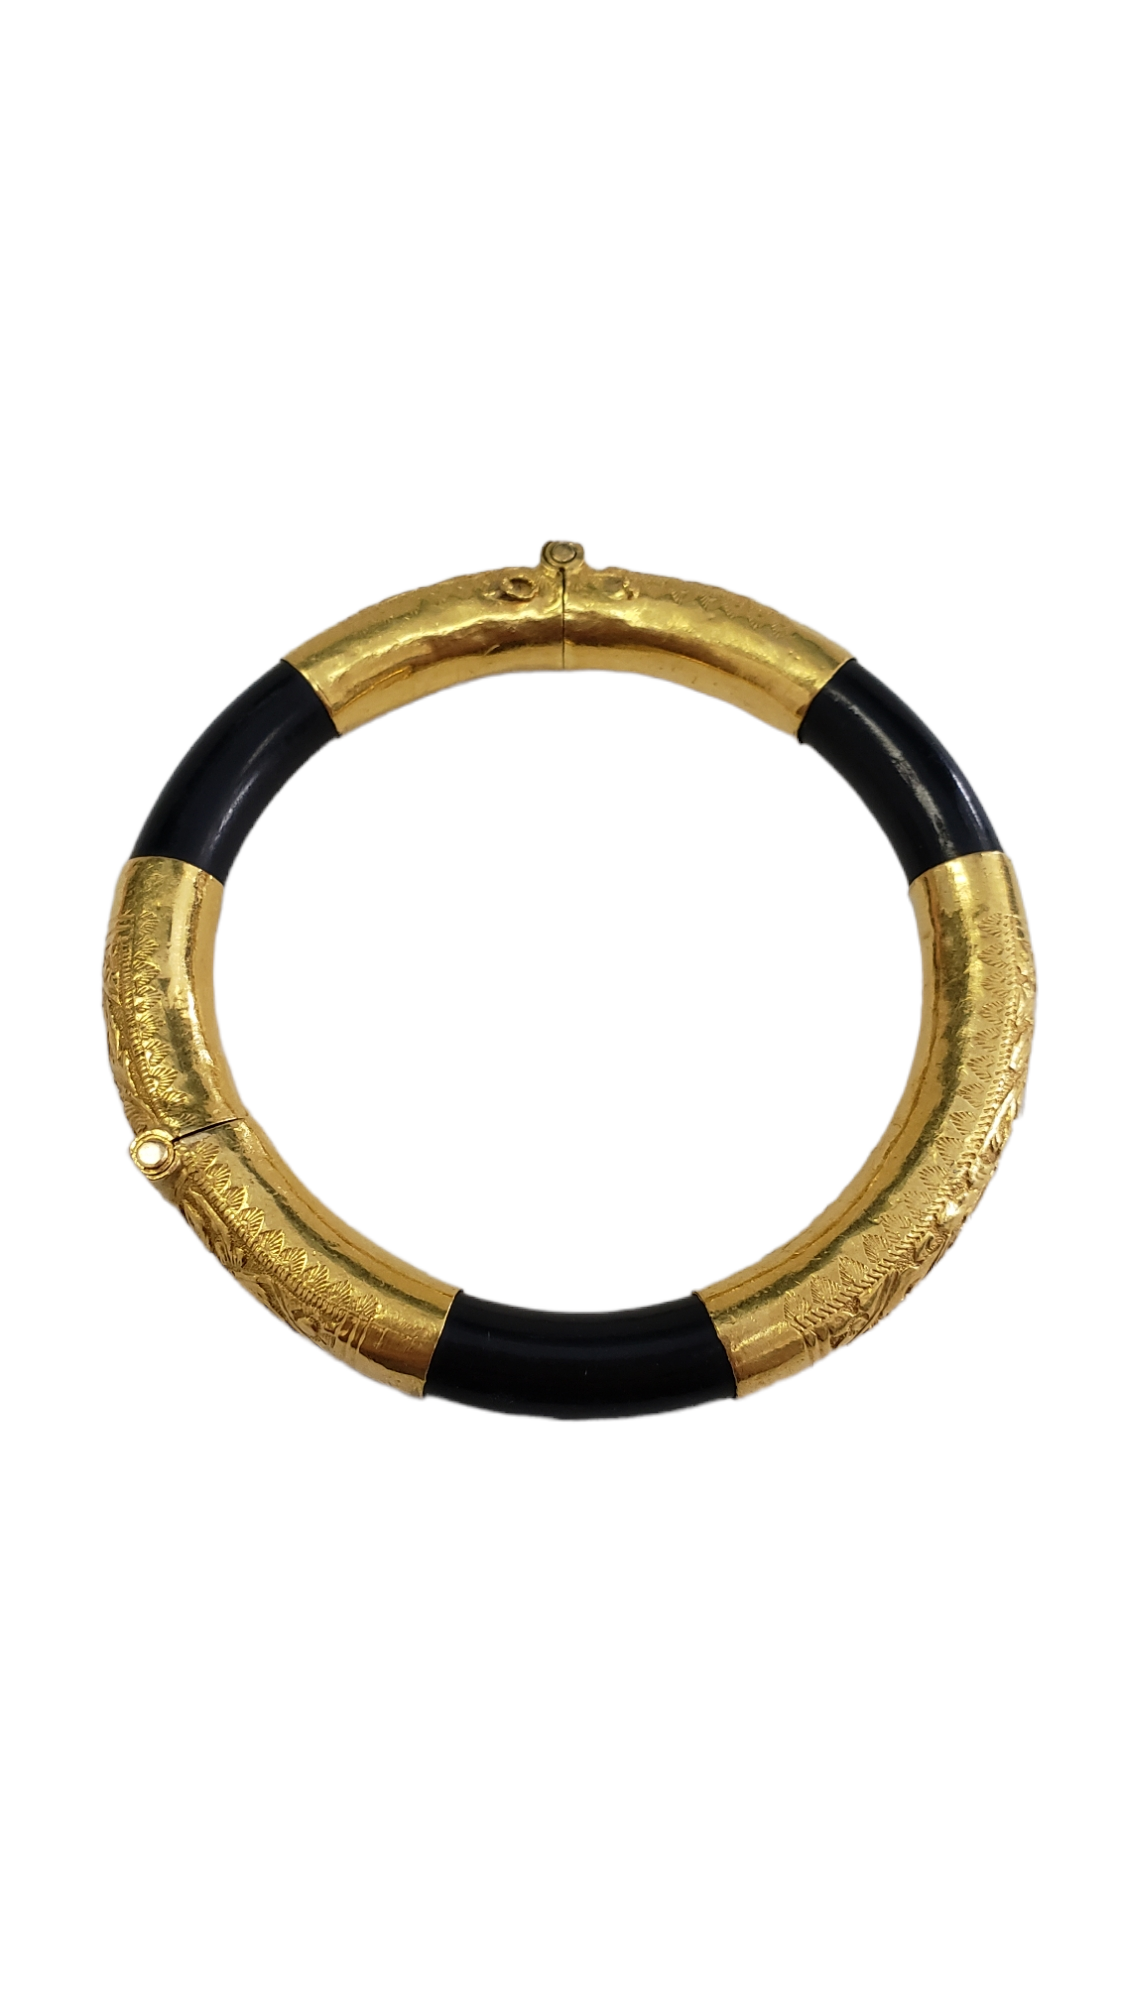 Black Onyx Hand-Carved Bangle Bracelet made with Hollow 22-Karat Yellow Gold